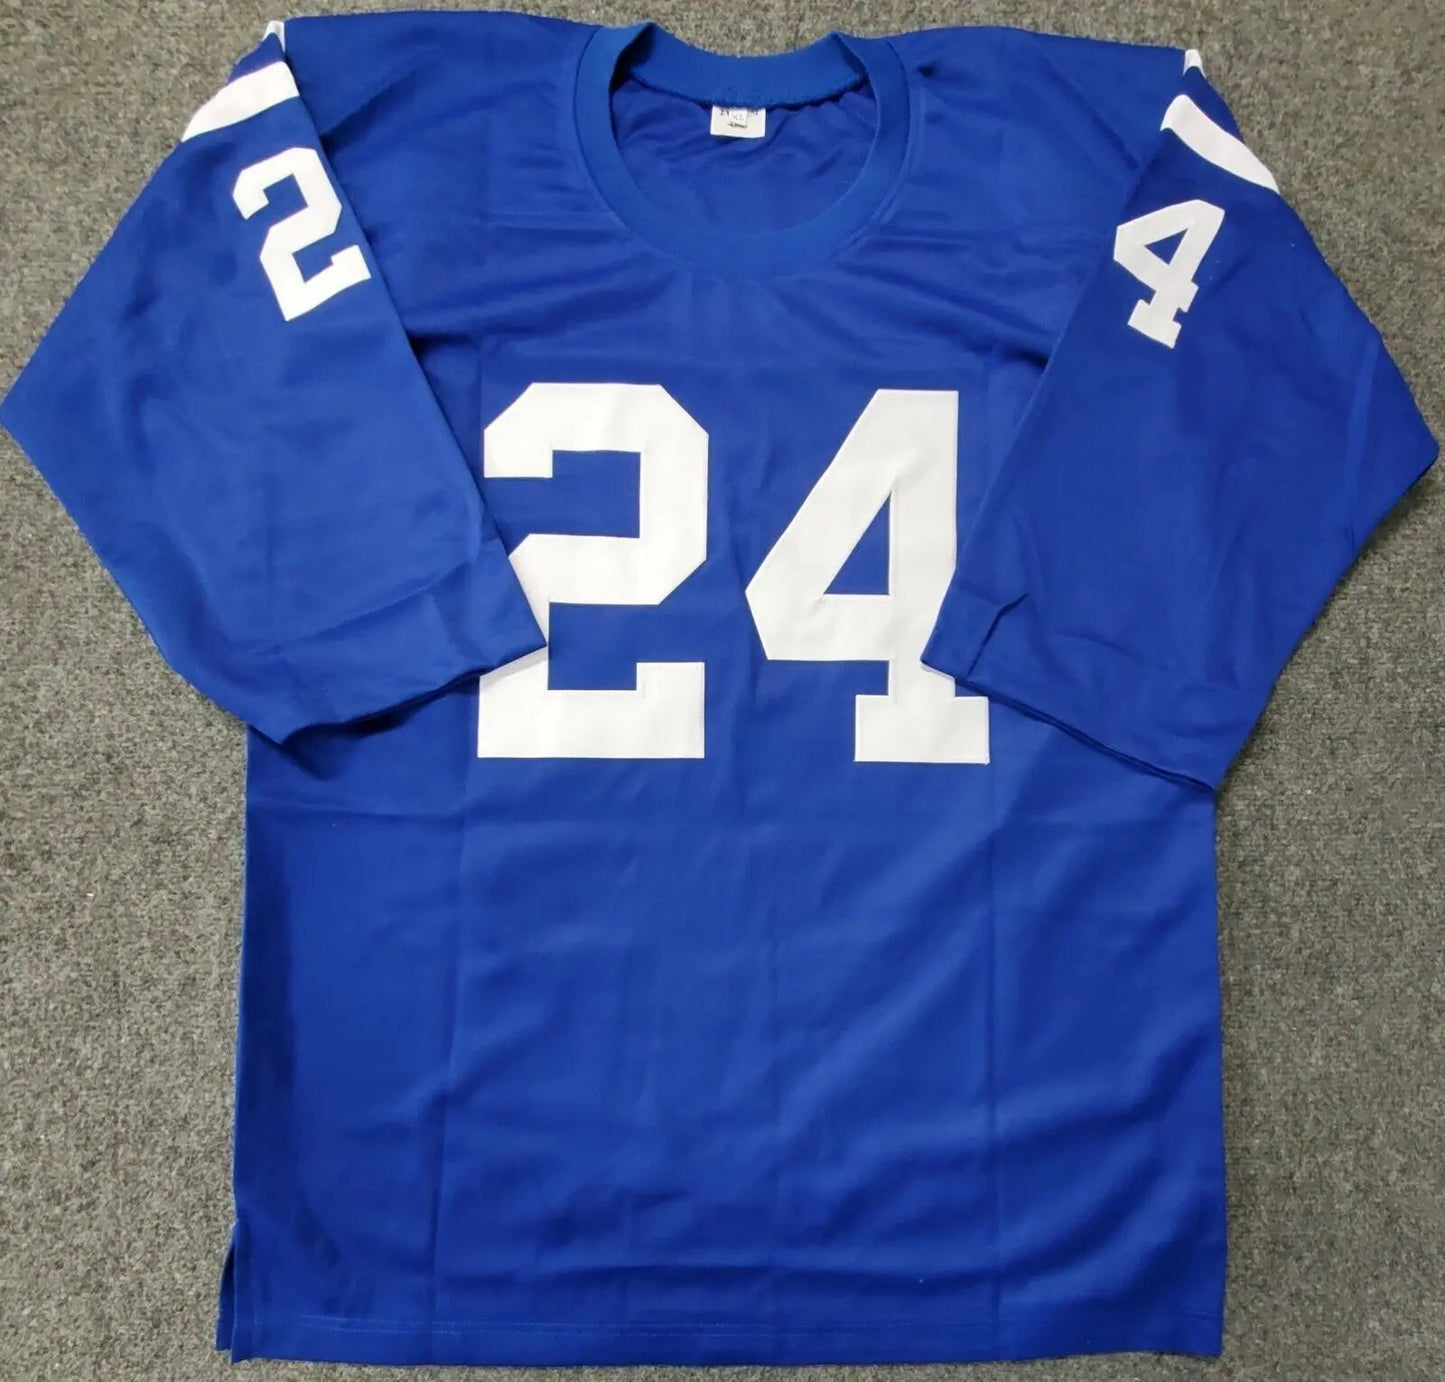 MVP Authentics Lenny Moore Autographed Signed Insc Baltimore Colts Tb Stat Jersey Jsa Coa 125.10 sports jersey framing , jersey framing